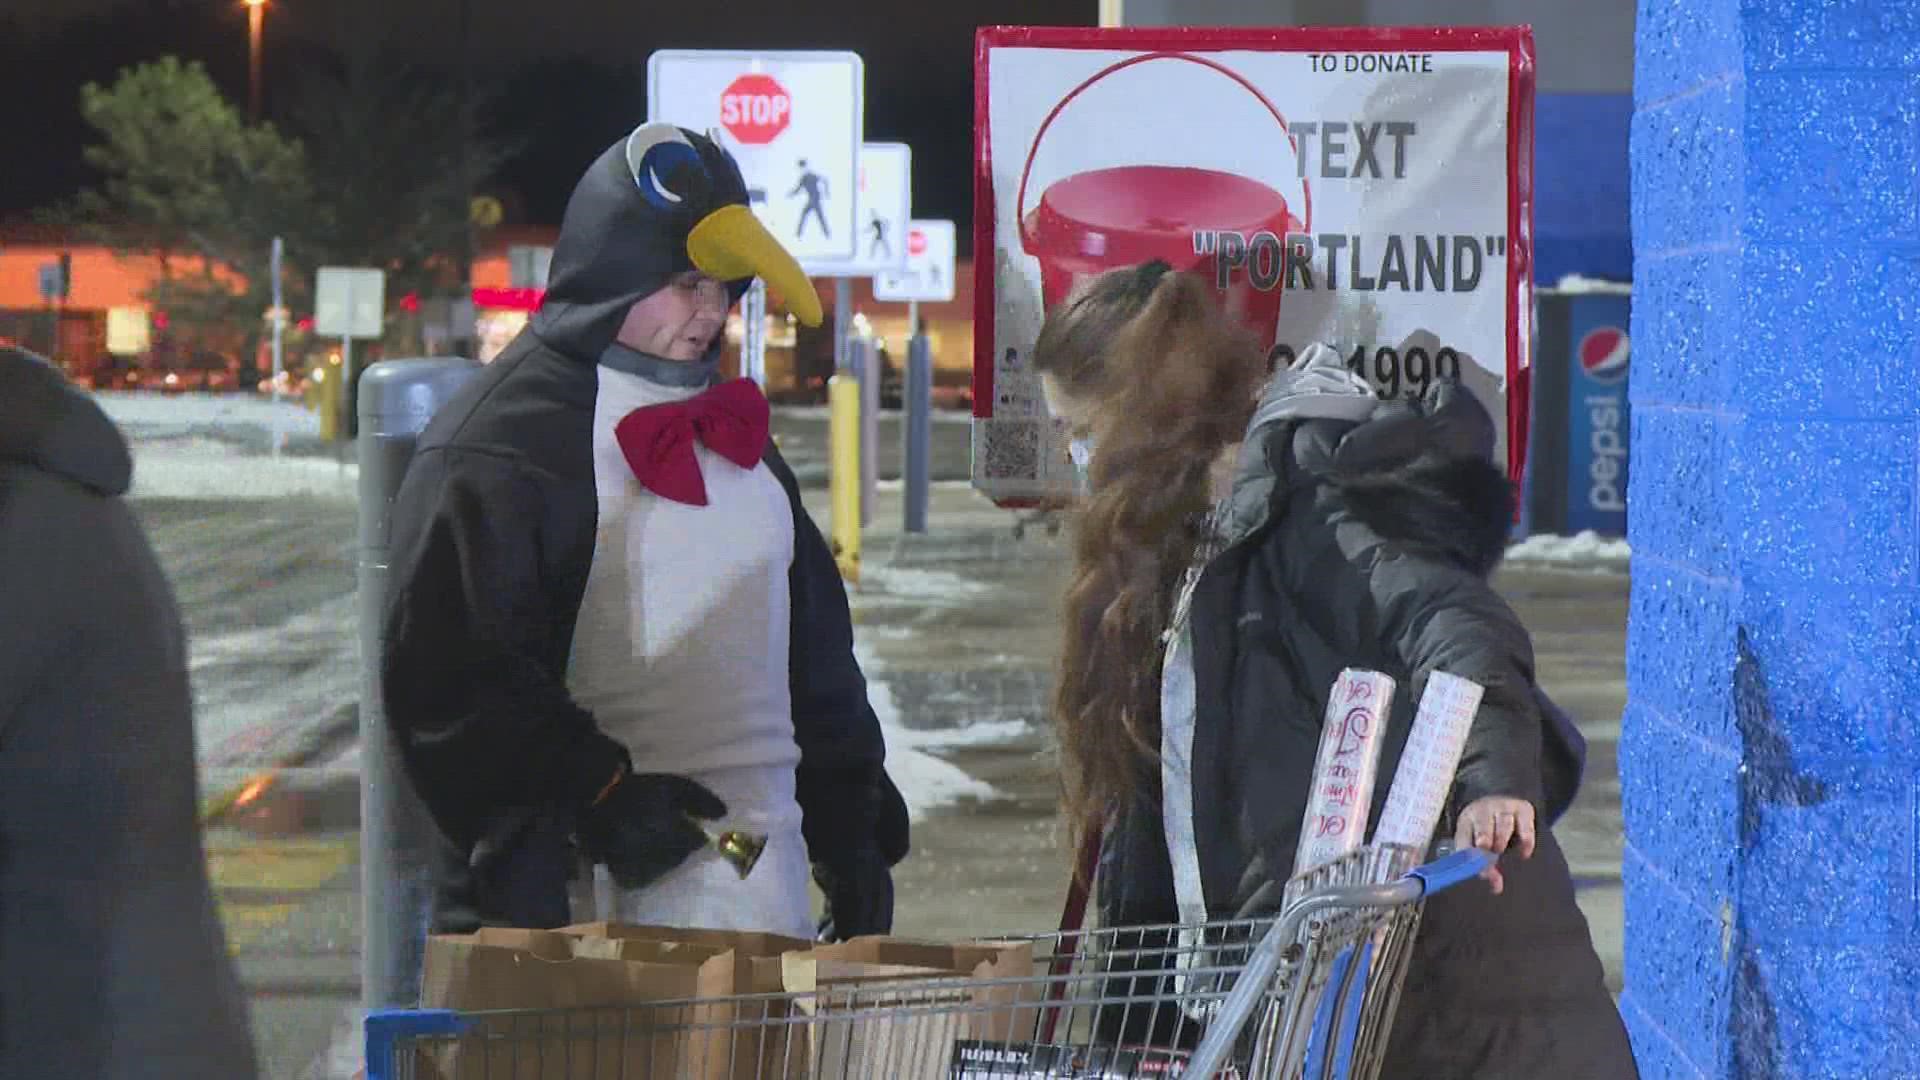 A volunteer dressed in a penguin costume is working to help raise more money for the charity.